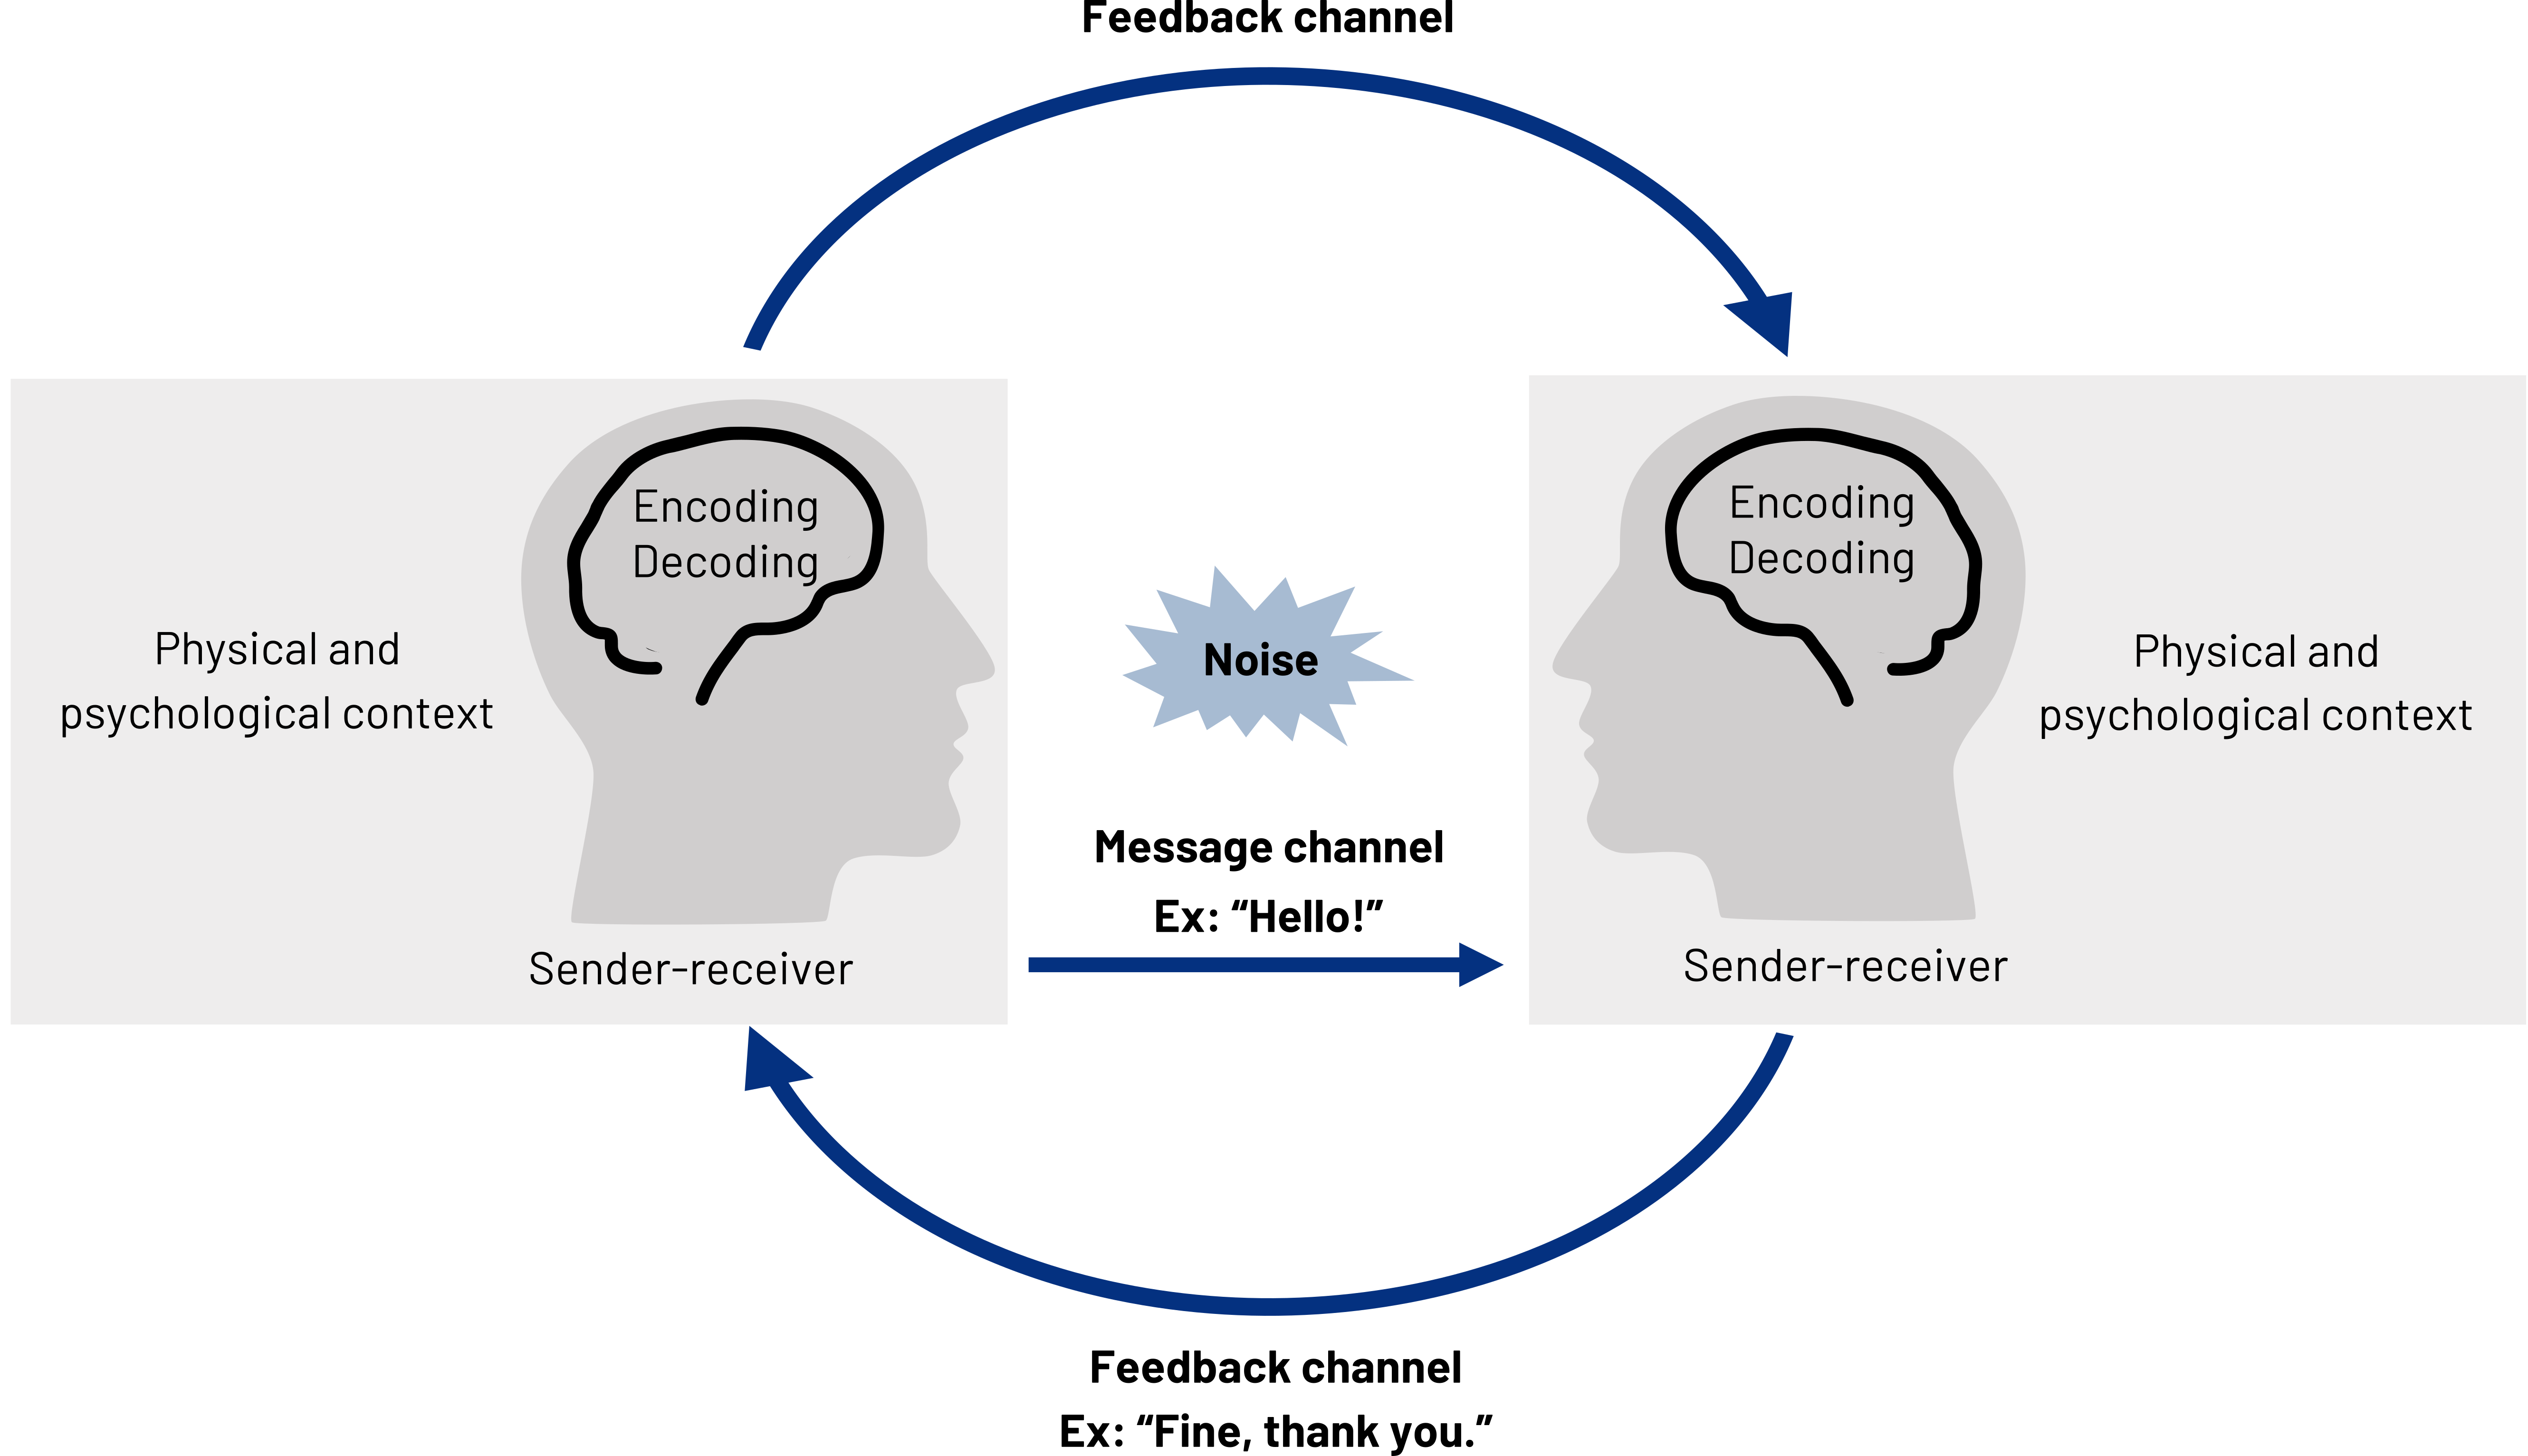 Same setup as figure 1.4, except the left and right heads have the same labels: Encoding and decoding, sender-receiver. Each head has a cloud around it representing physical and psychological context. A circle with clockwise arrows connects the two heads. Top of circle: Feedback channel. Bottom of circle: Feedback channel. Ex: "Fine, thank you."